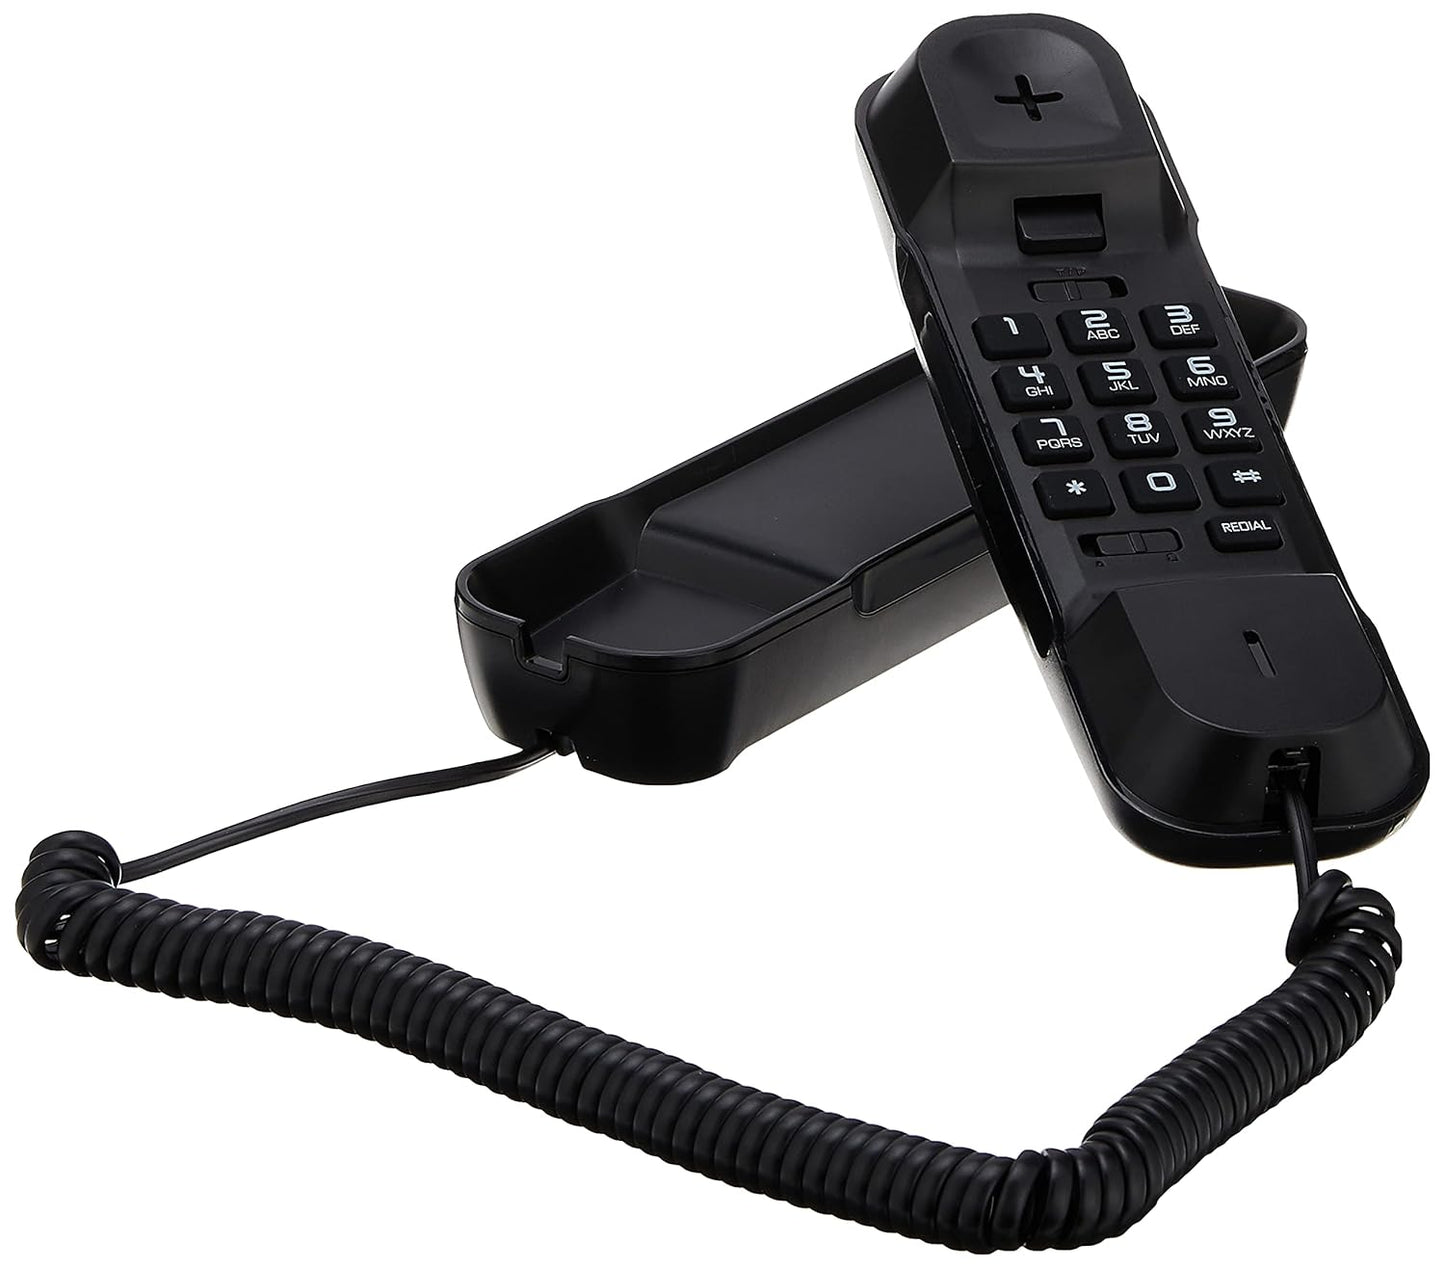 Alcatel T06 Ultra Compact Wall Mount Corded Landline Phone Black (Pack Of 5)